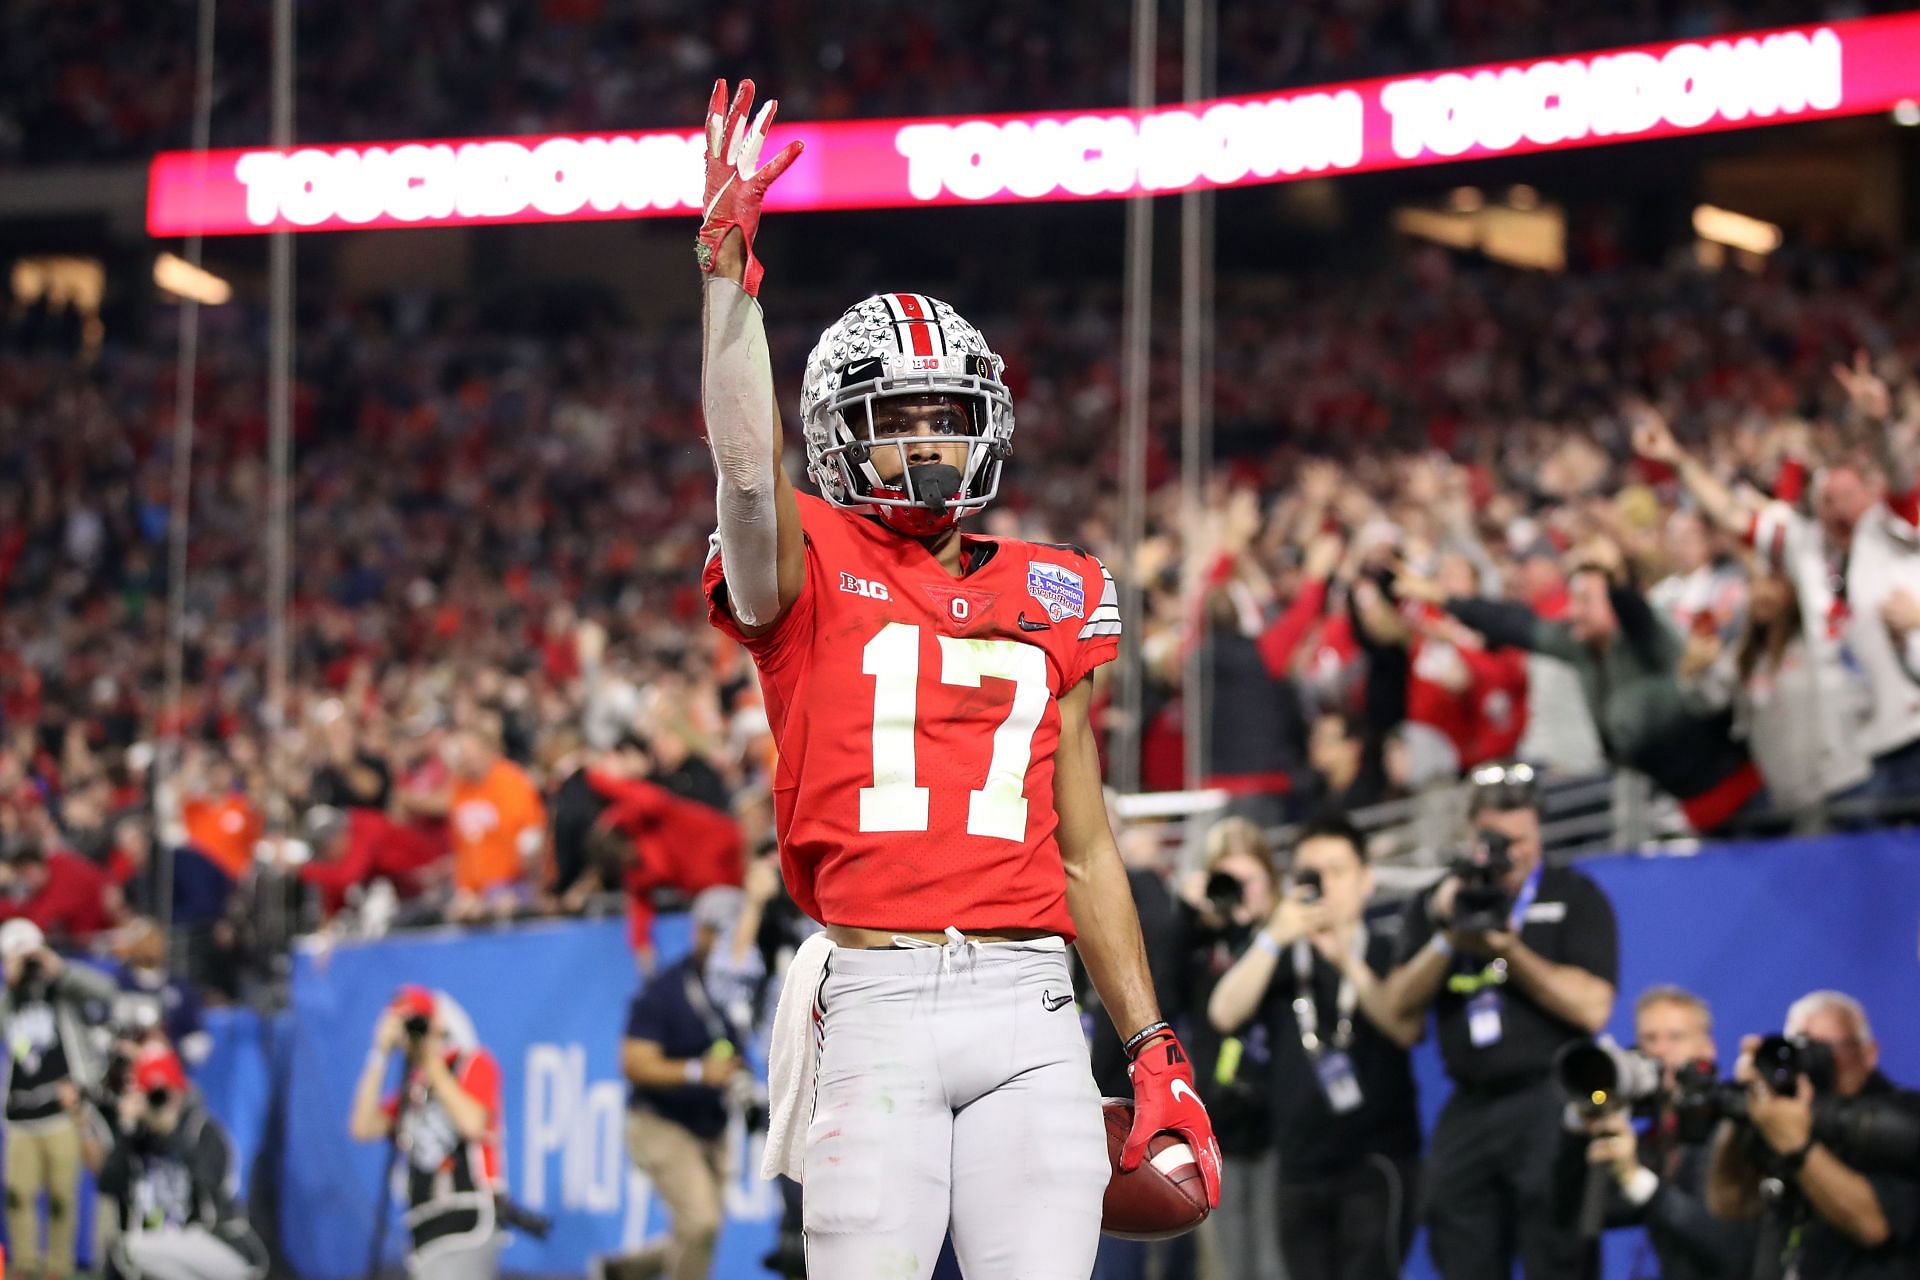 Chris Olave #17 of the Ohio State Buckeyes celebrates his touchdown reception against the Clemson Tigers in the second half during the College Football Playoff Semifinal at the PlayStation Fiesta Bowl at State Farm Stadium on December 28, 2019 in Glendale, Arizona.